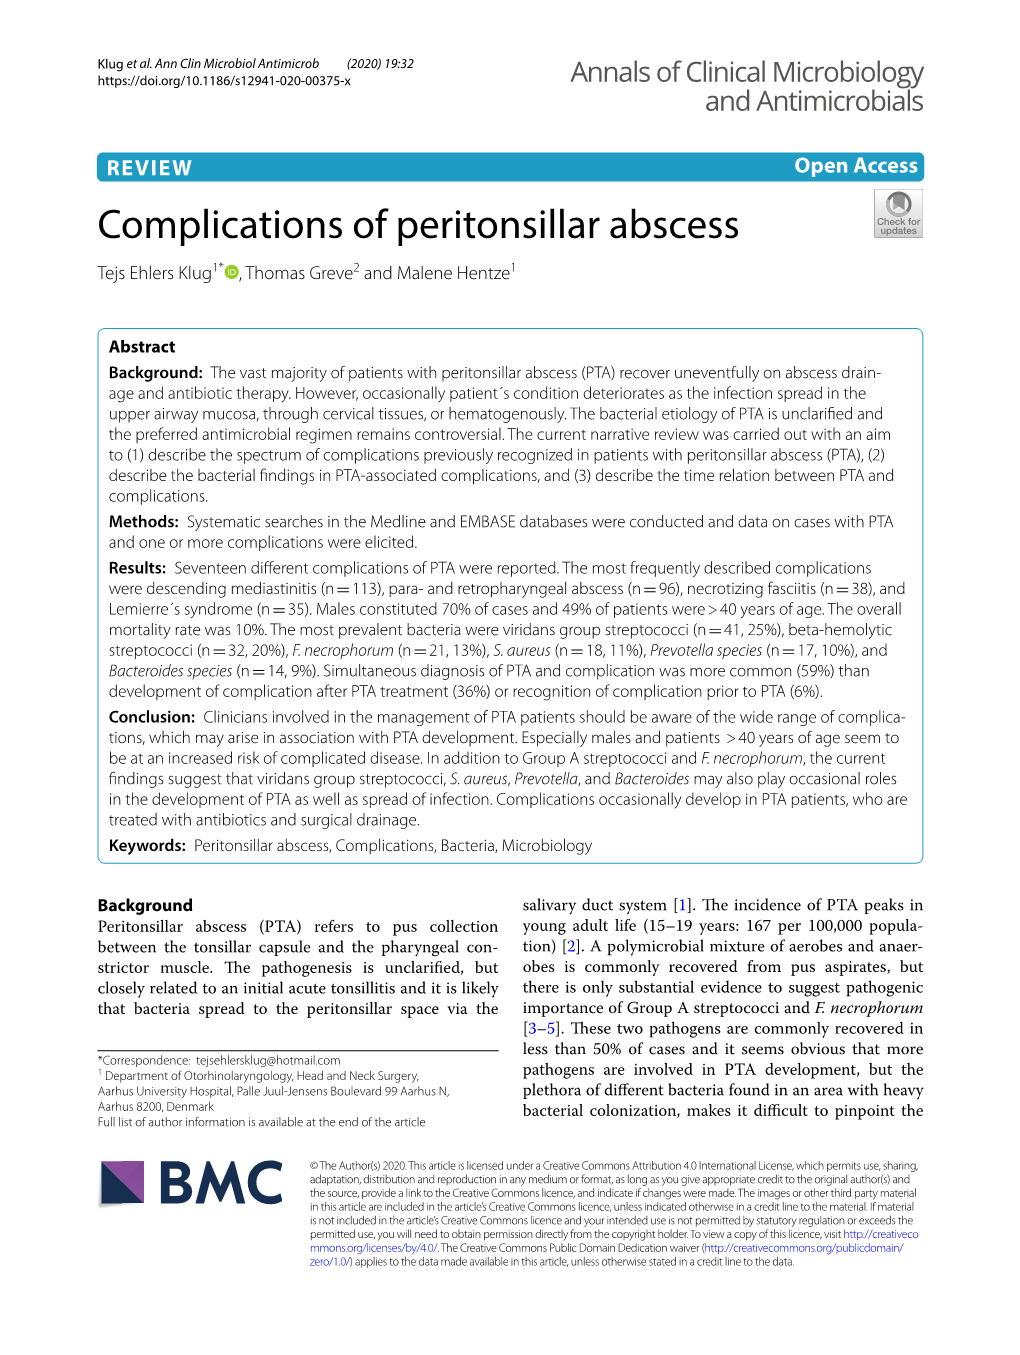 Complications of Peritonsillar Abscess Tejs Ehlers Klug1* , Thomas Greve2 and Malene Hentze1